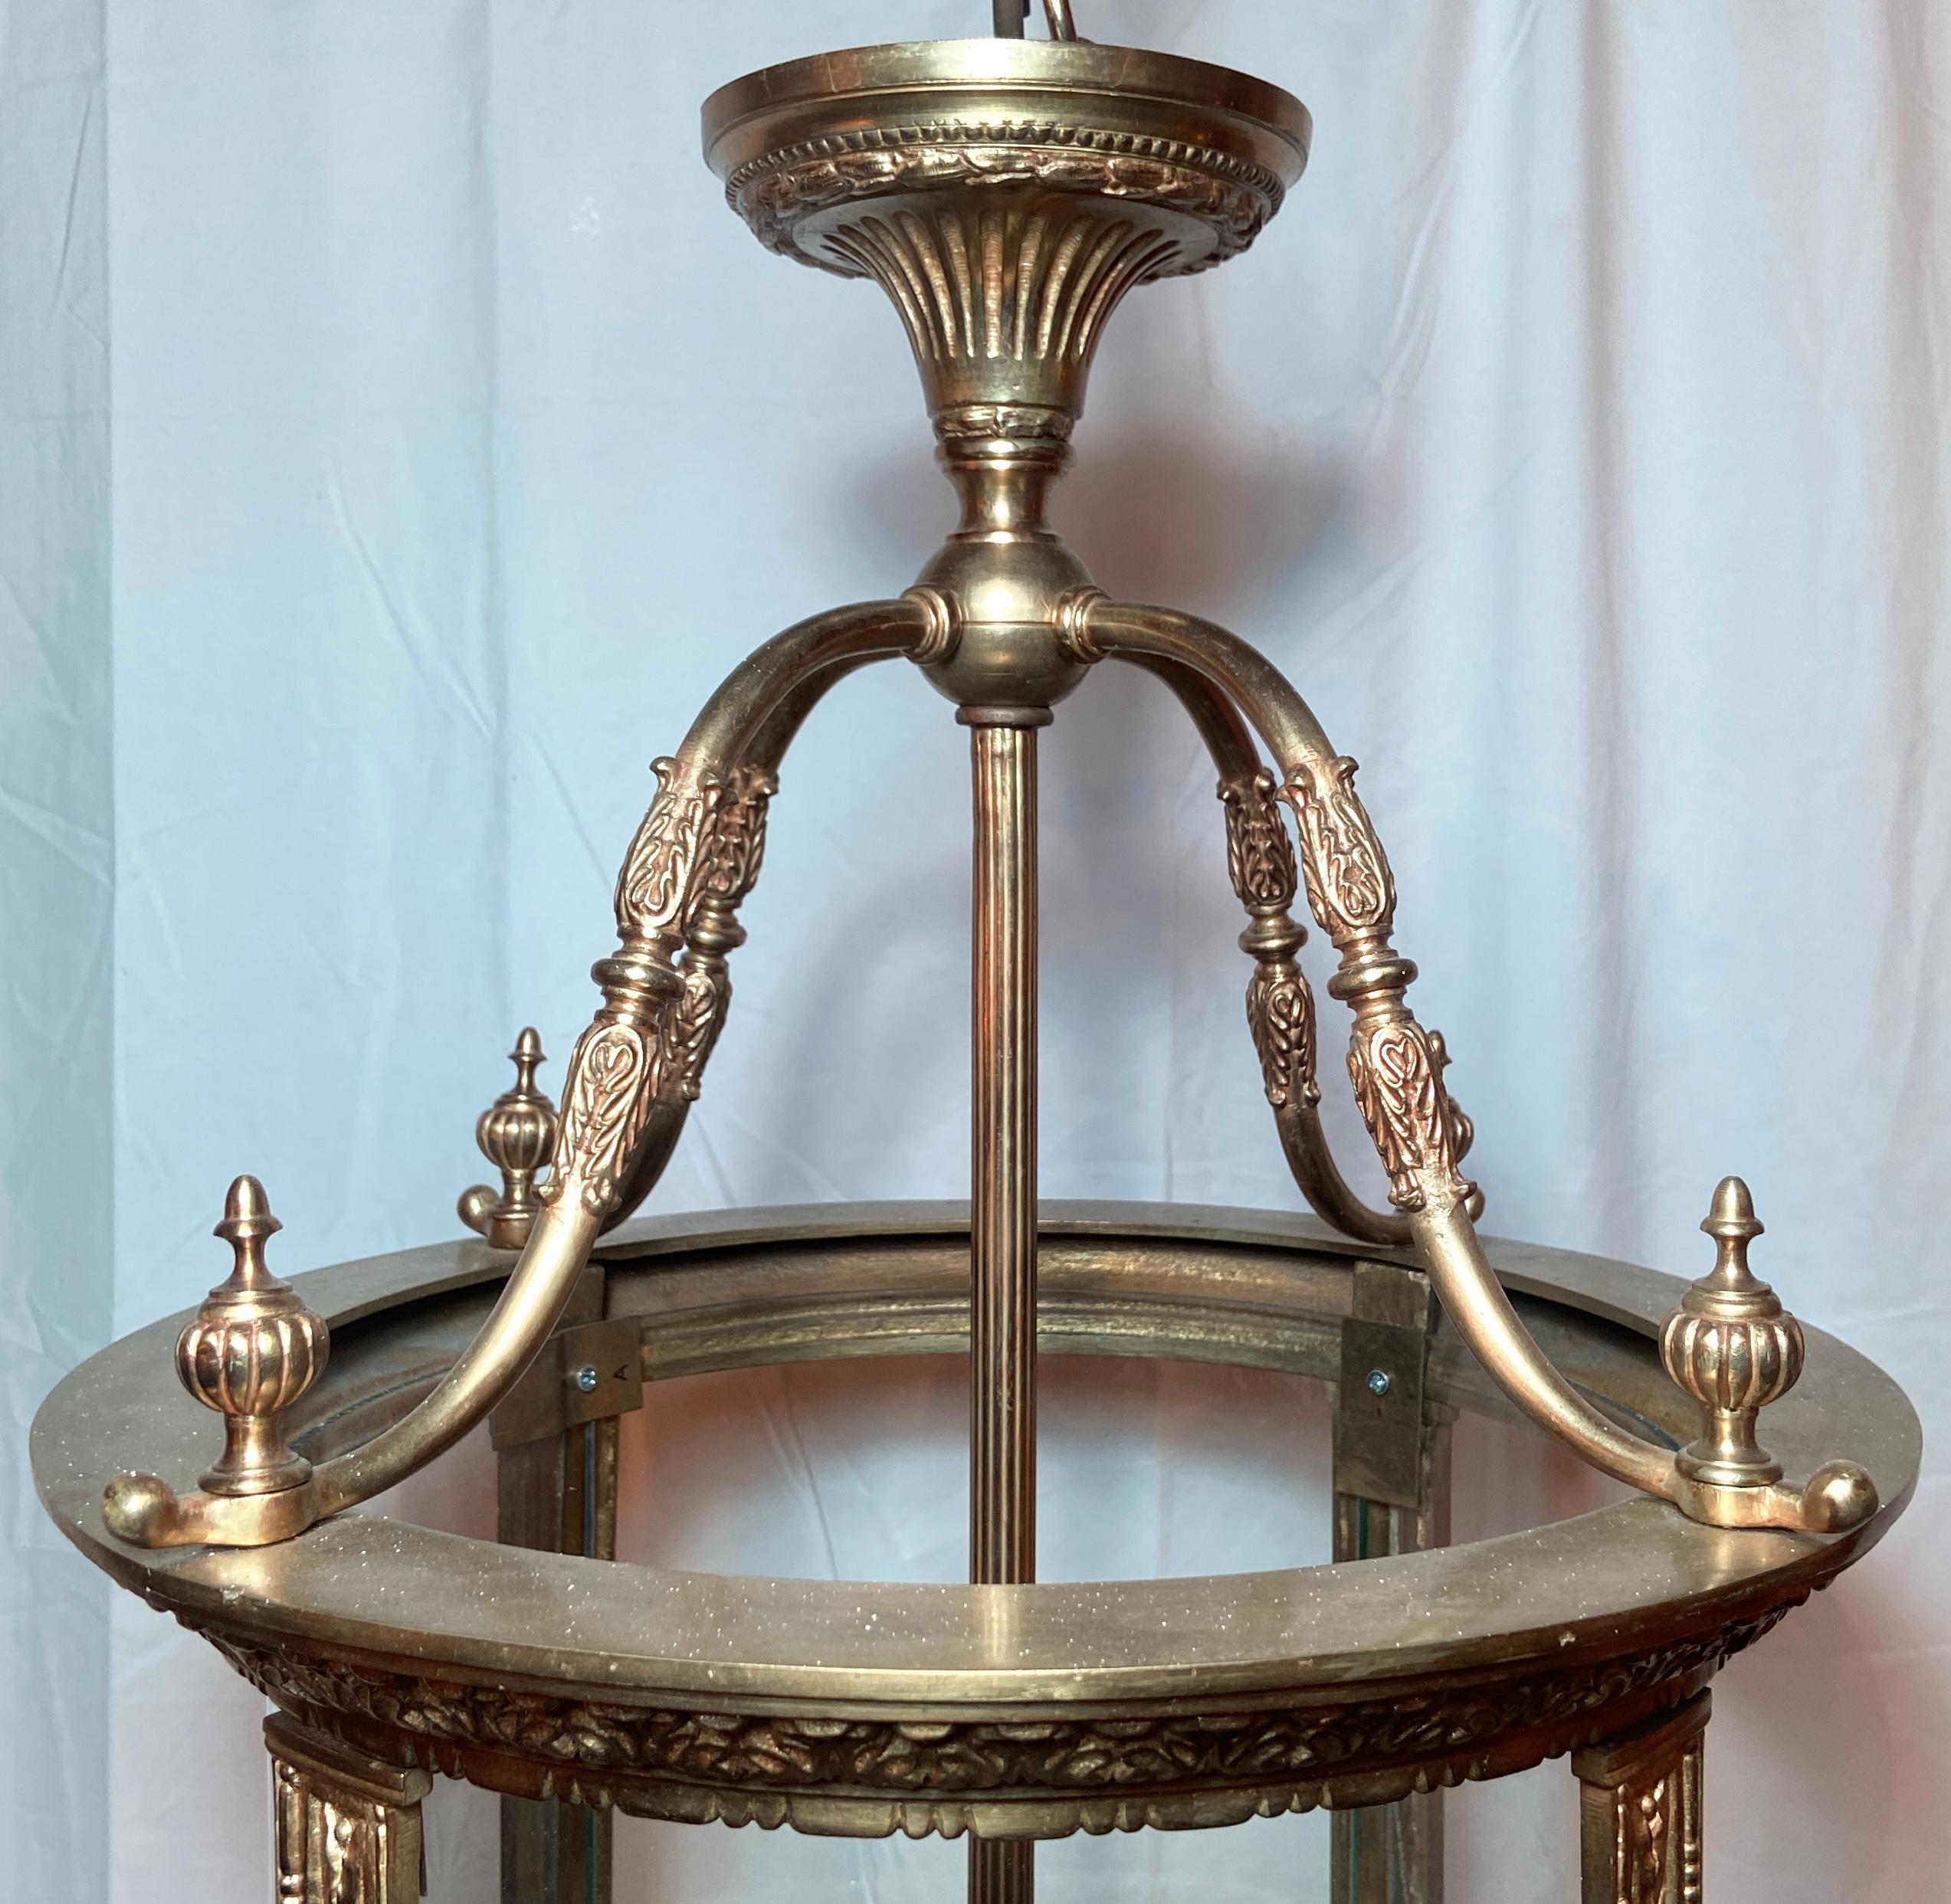 Antique 19th century French gold bronze lantern with engraved glass.
Glass has a figural starburst engraving at center.